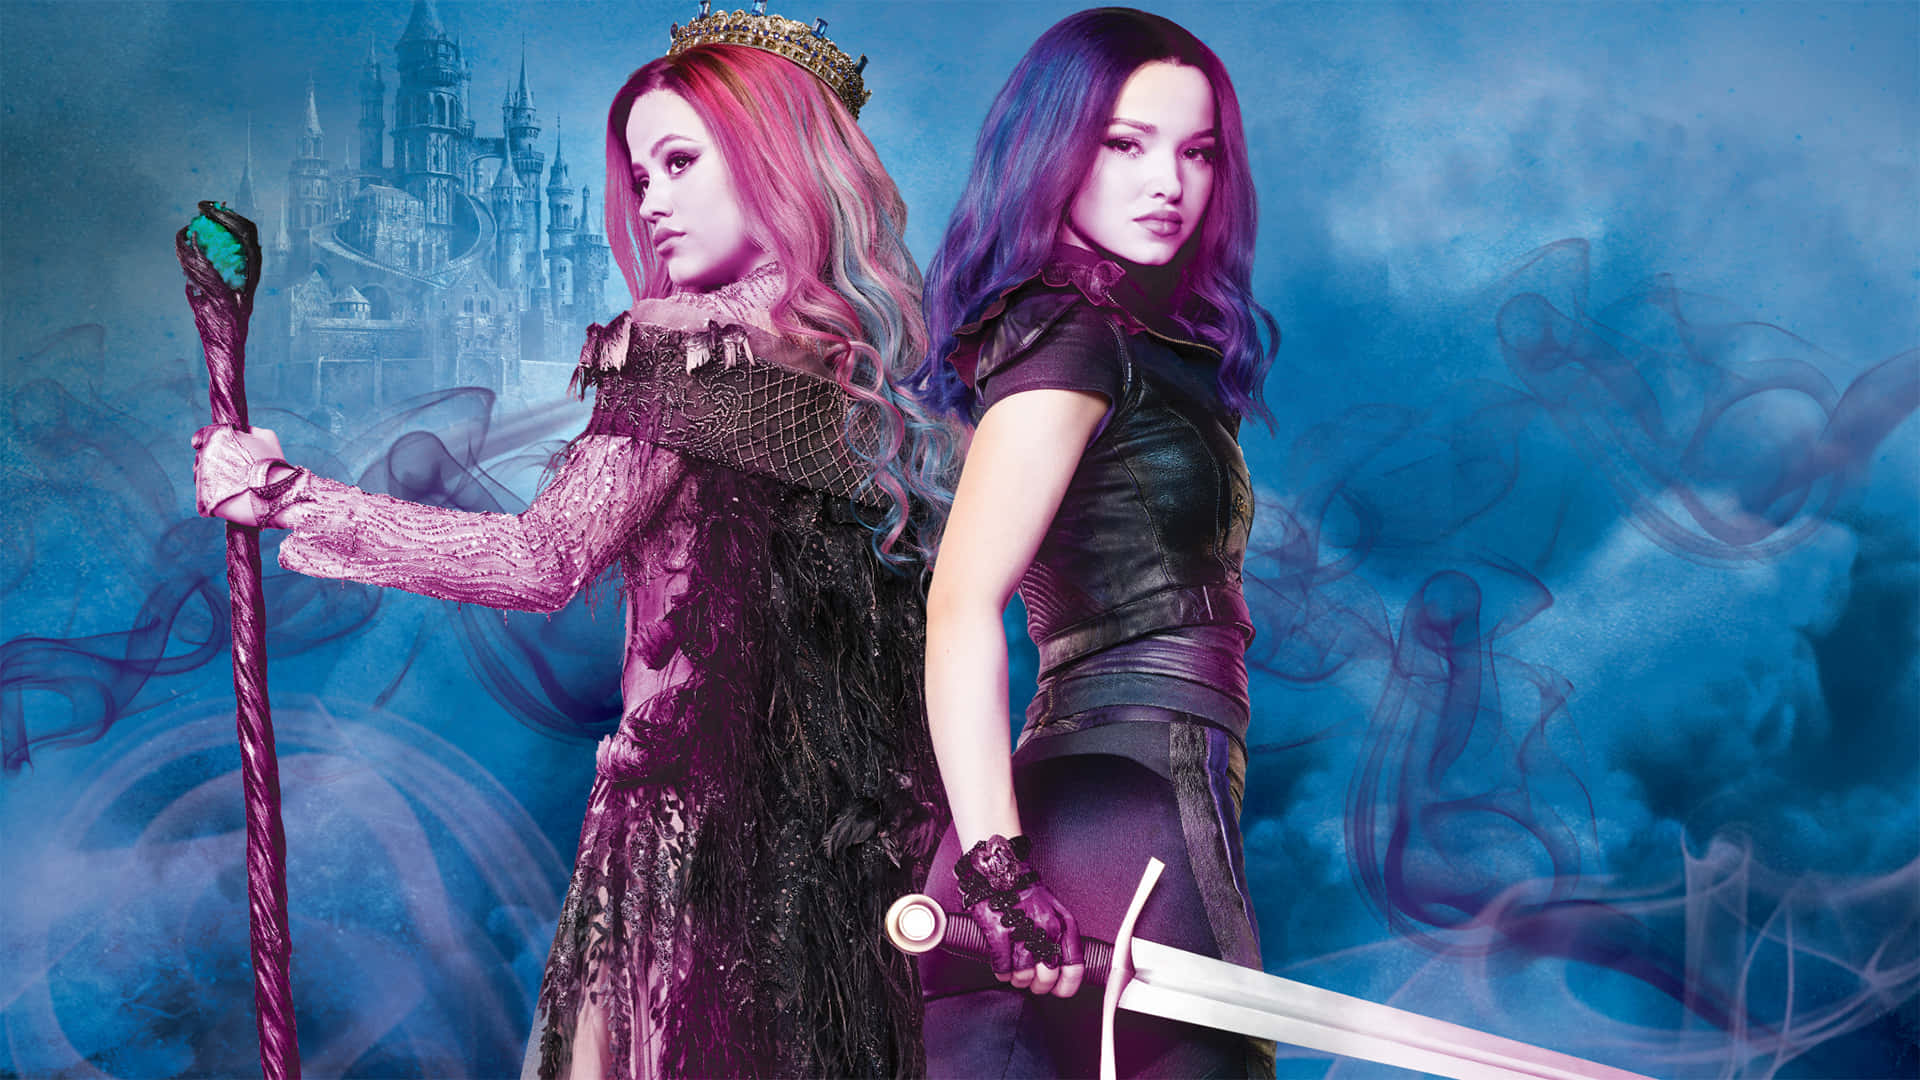 The main characters of Disney's Descendants posing together in an enchanting scene.